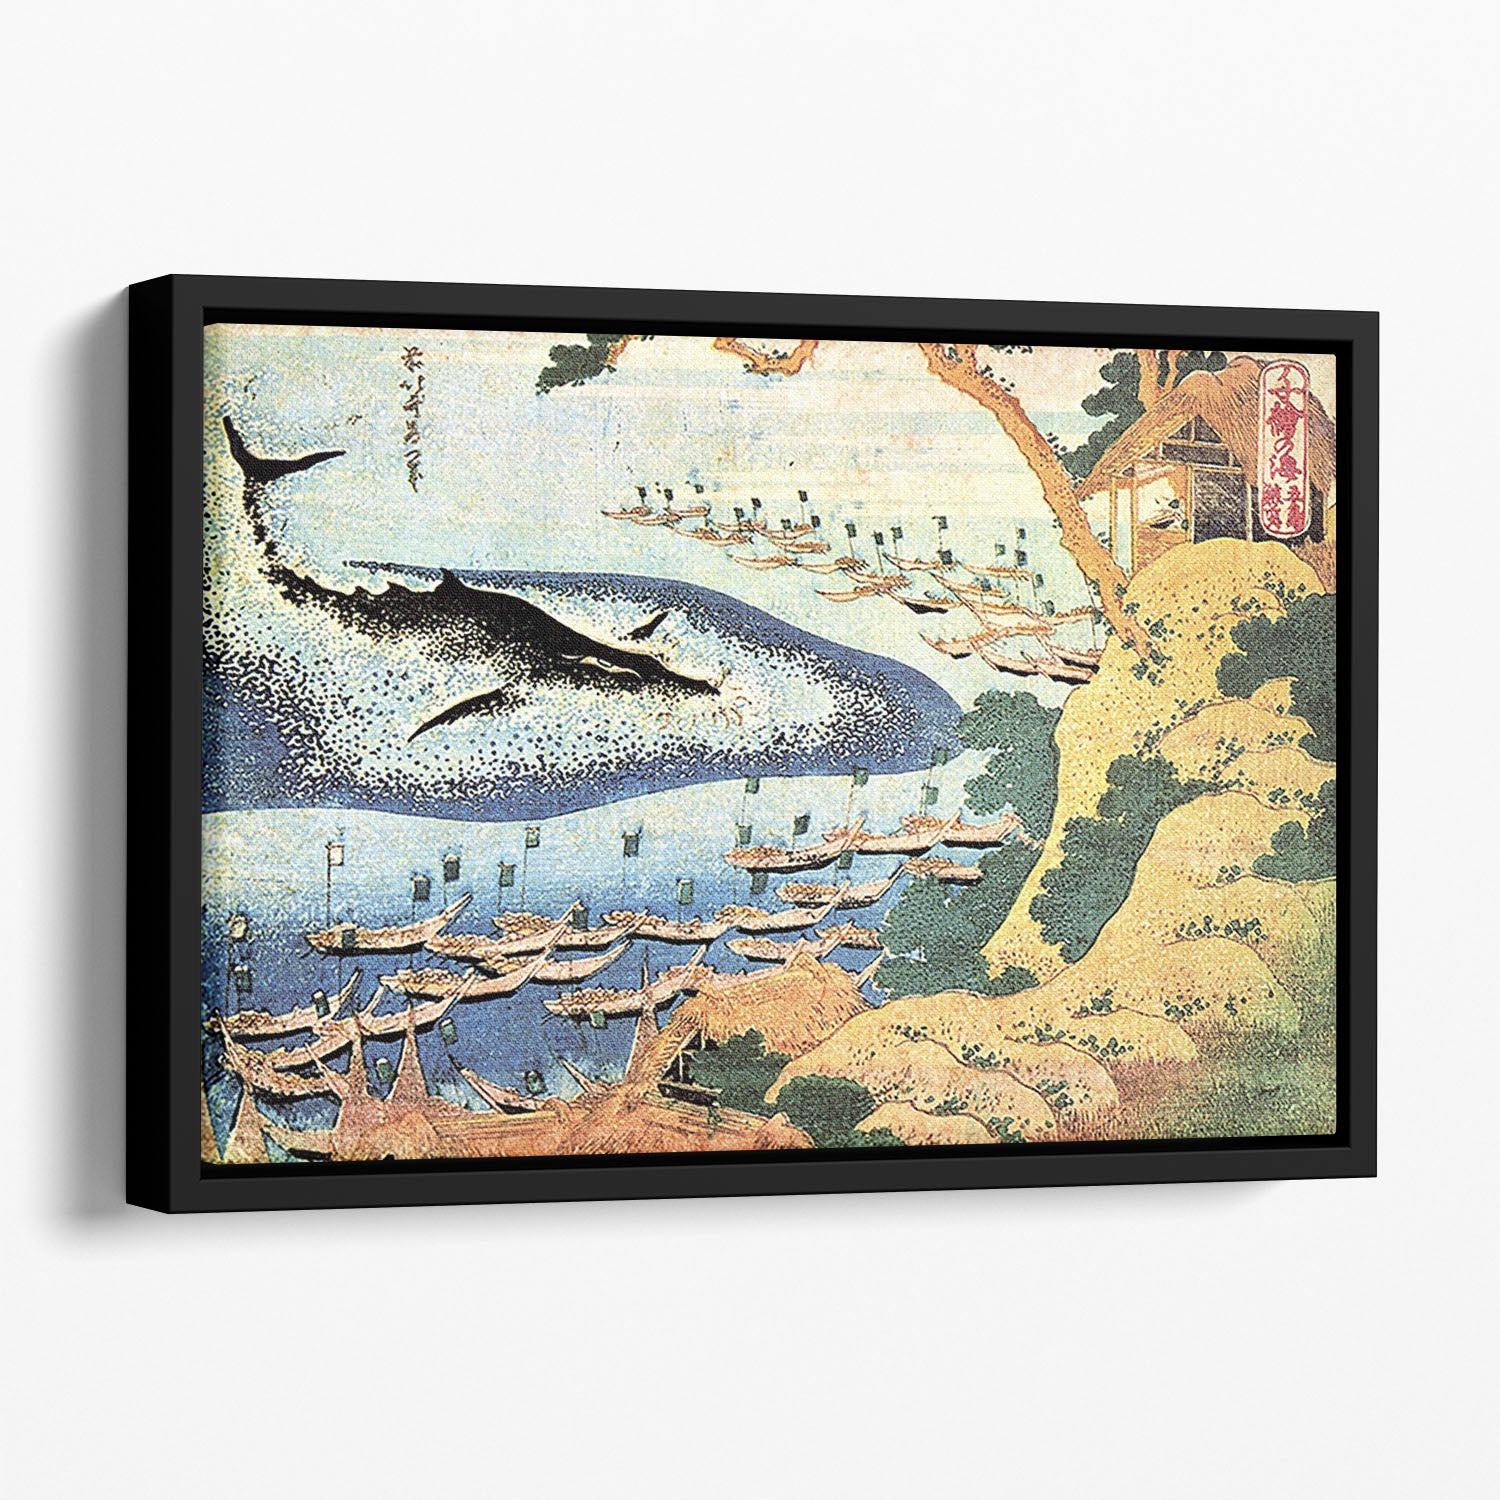 Ocean landscape and whale by Hokusai Floating Framed Canvas